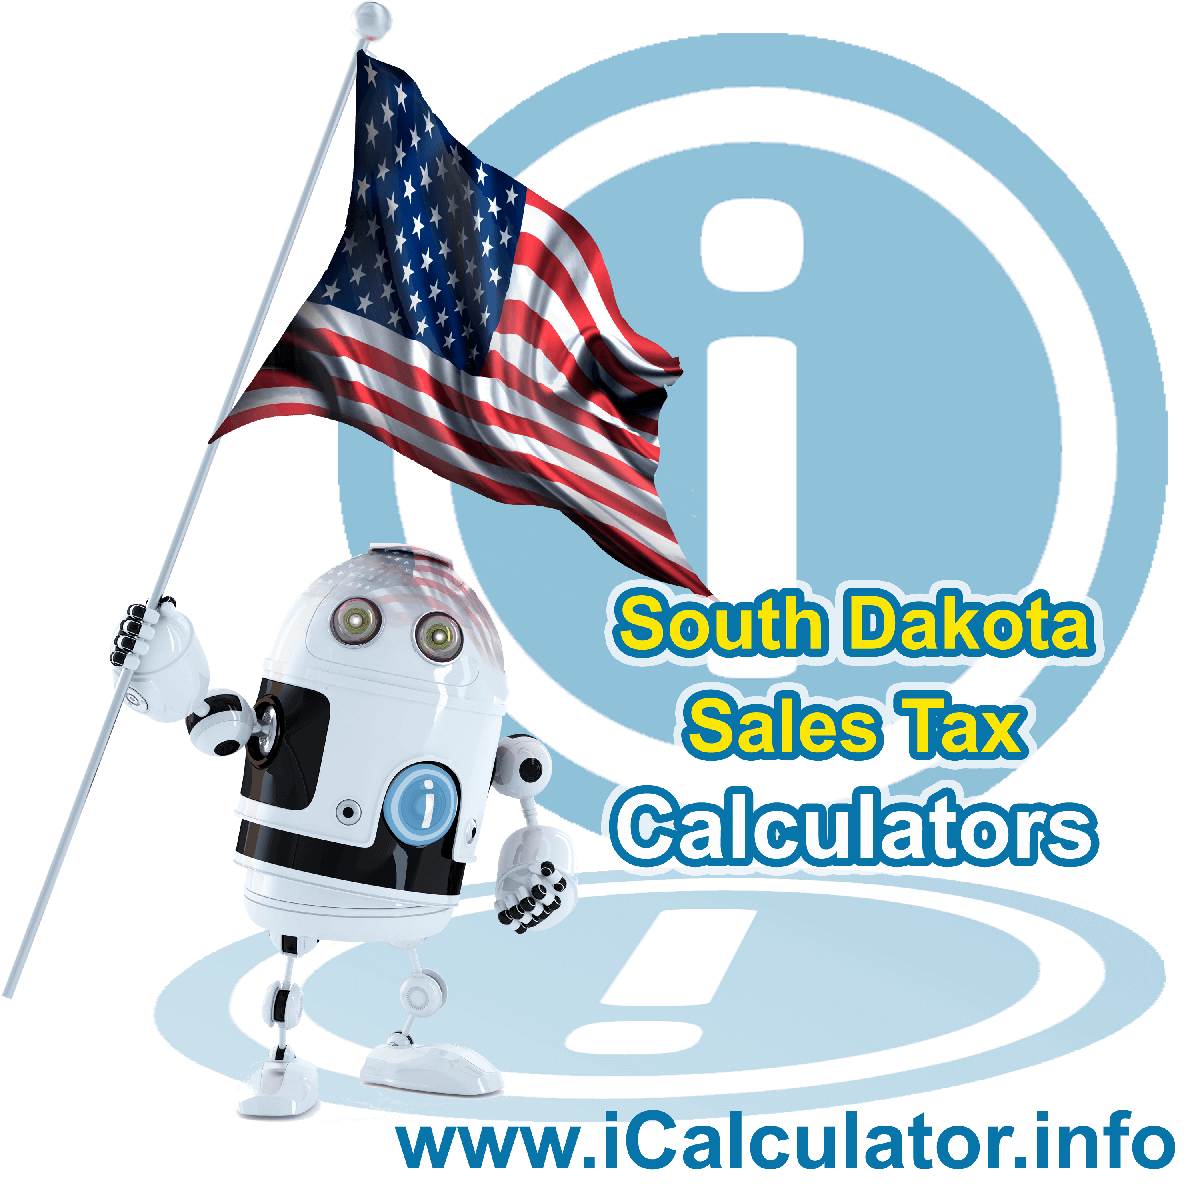 De Smet Sales Rates: This image illustrates a calculator robot calculating De Smet sales tax manually using the De Smet Sales Tax Formula. You can use this information to calculate De Smet Sales Tax manually or use the De Smet Sales Tax Calculator to calculate sales tax online.